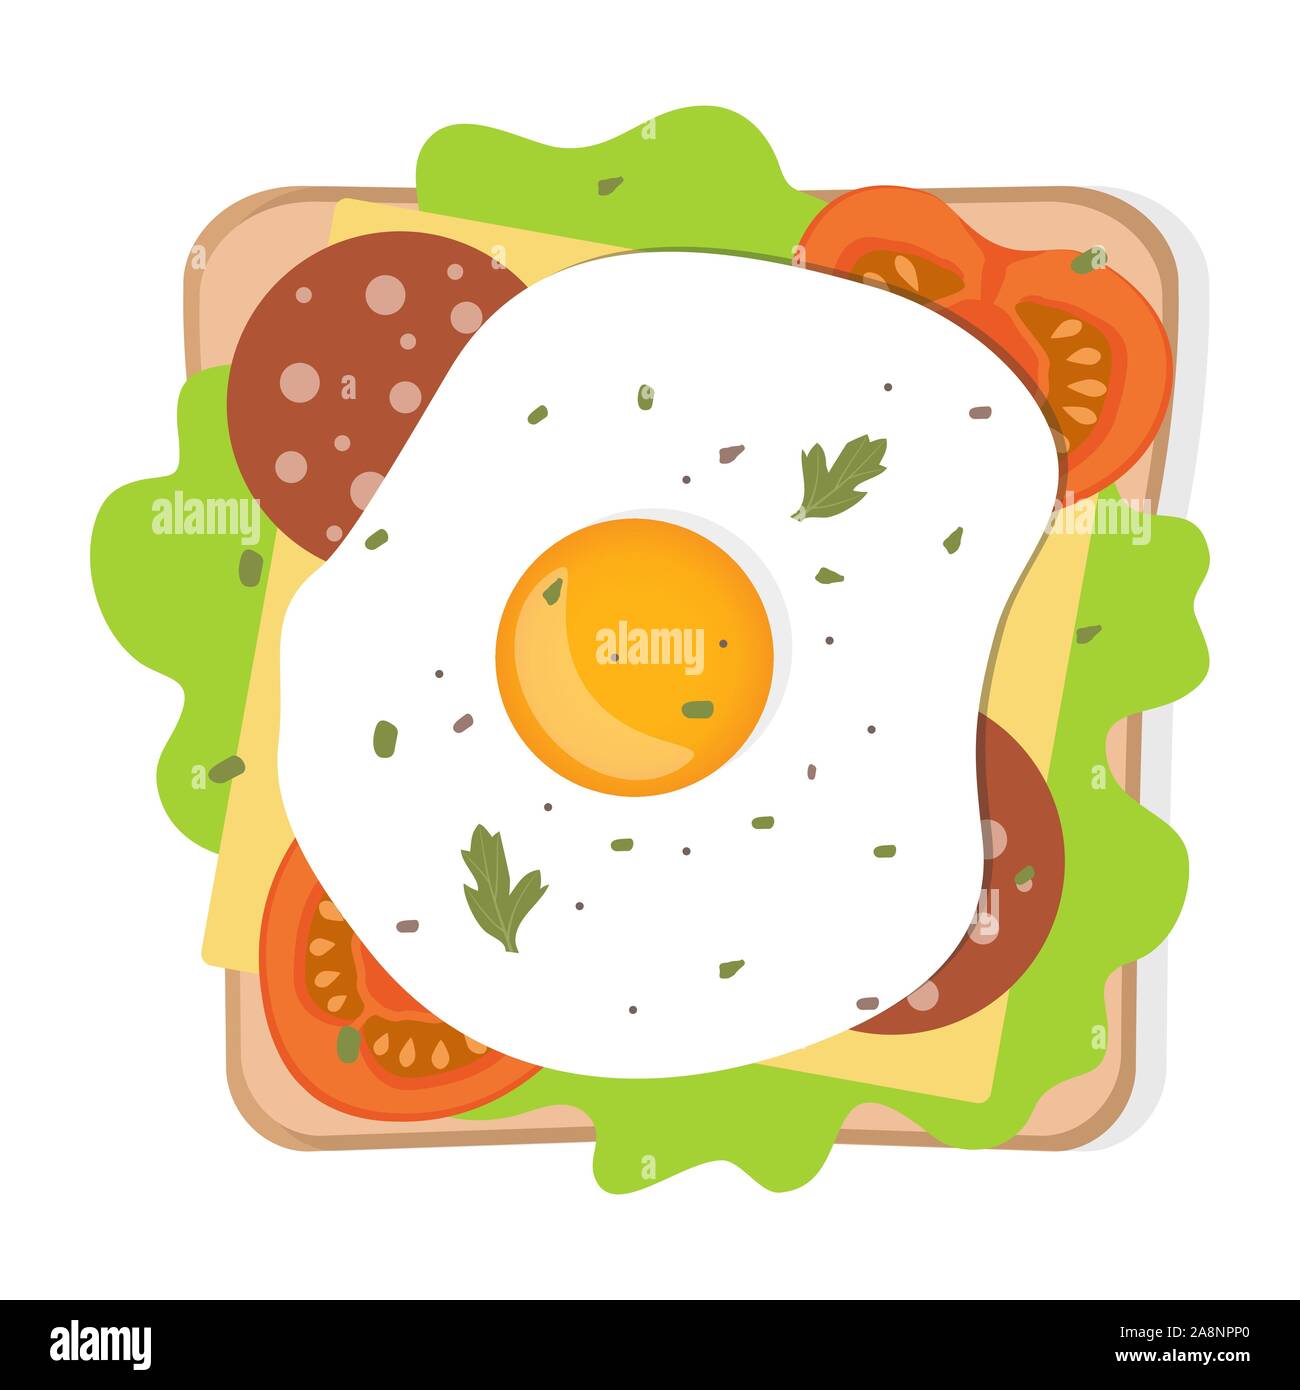 Toast with fried egg and vegetables. Sandwich with bread, egg, cheese, tomato, sausage, herbs and spices. Best for breakfast. Vector illustration Stock Vector